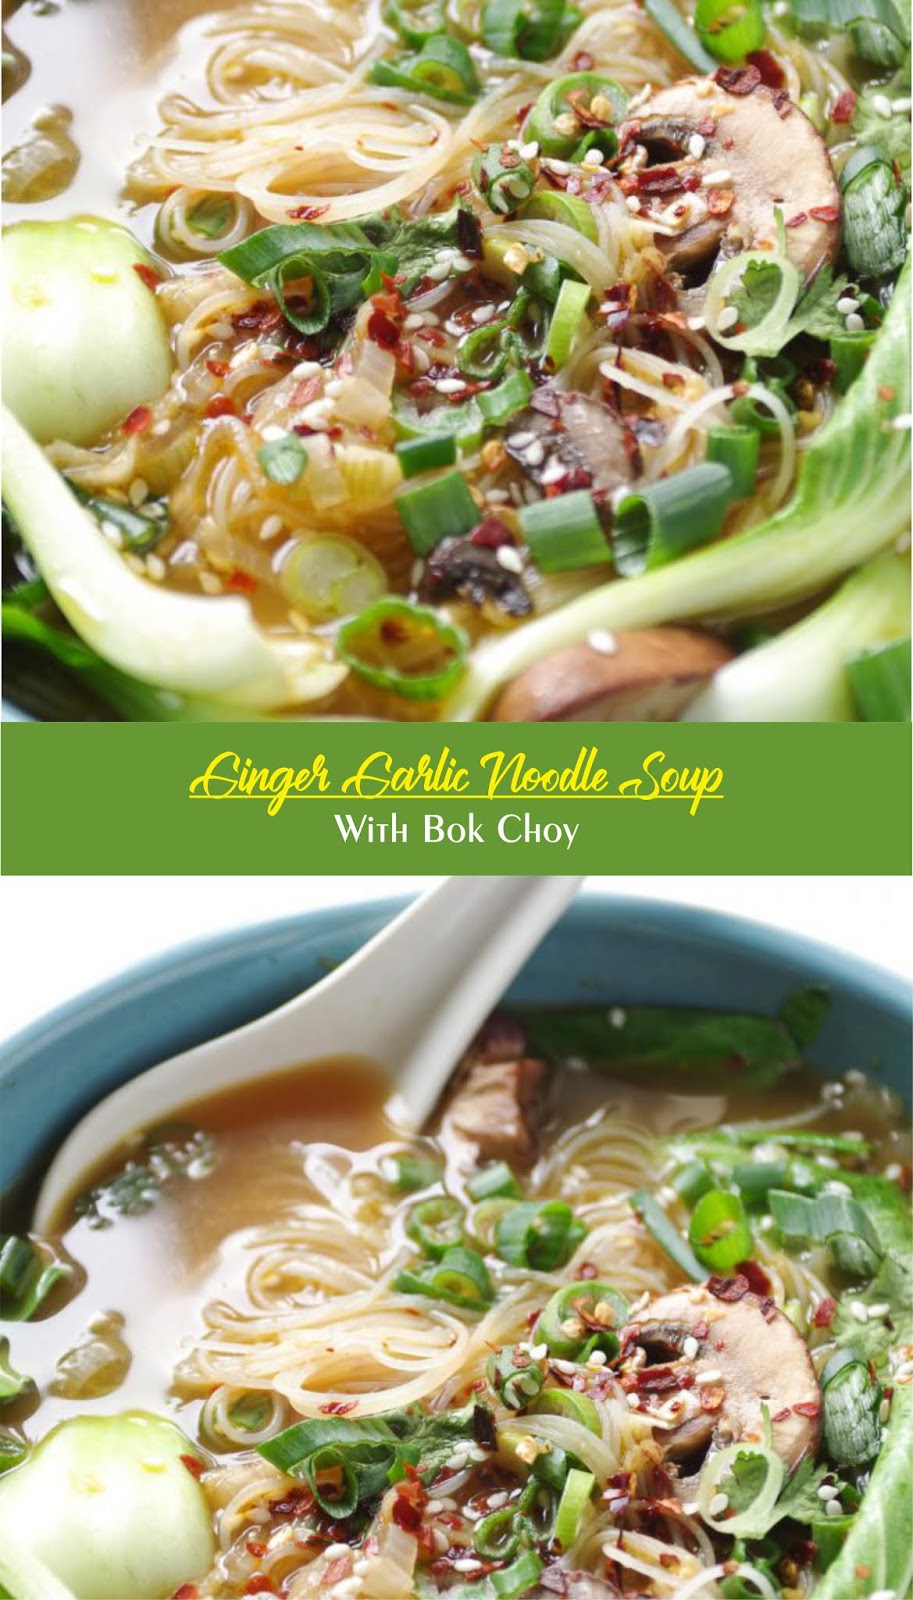 Ginger Garlic Noodle Soup with Bok Choy | EAT